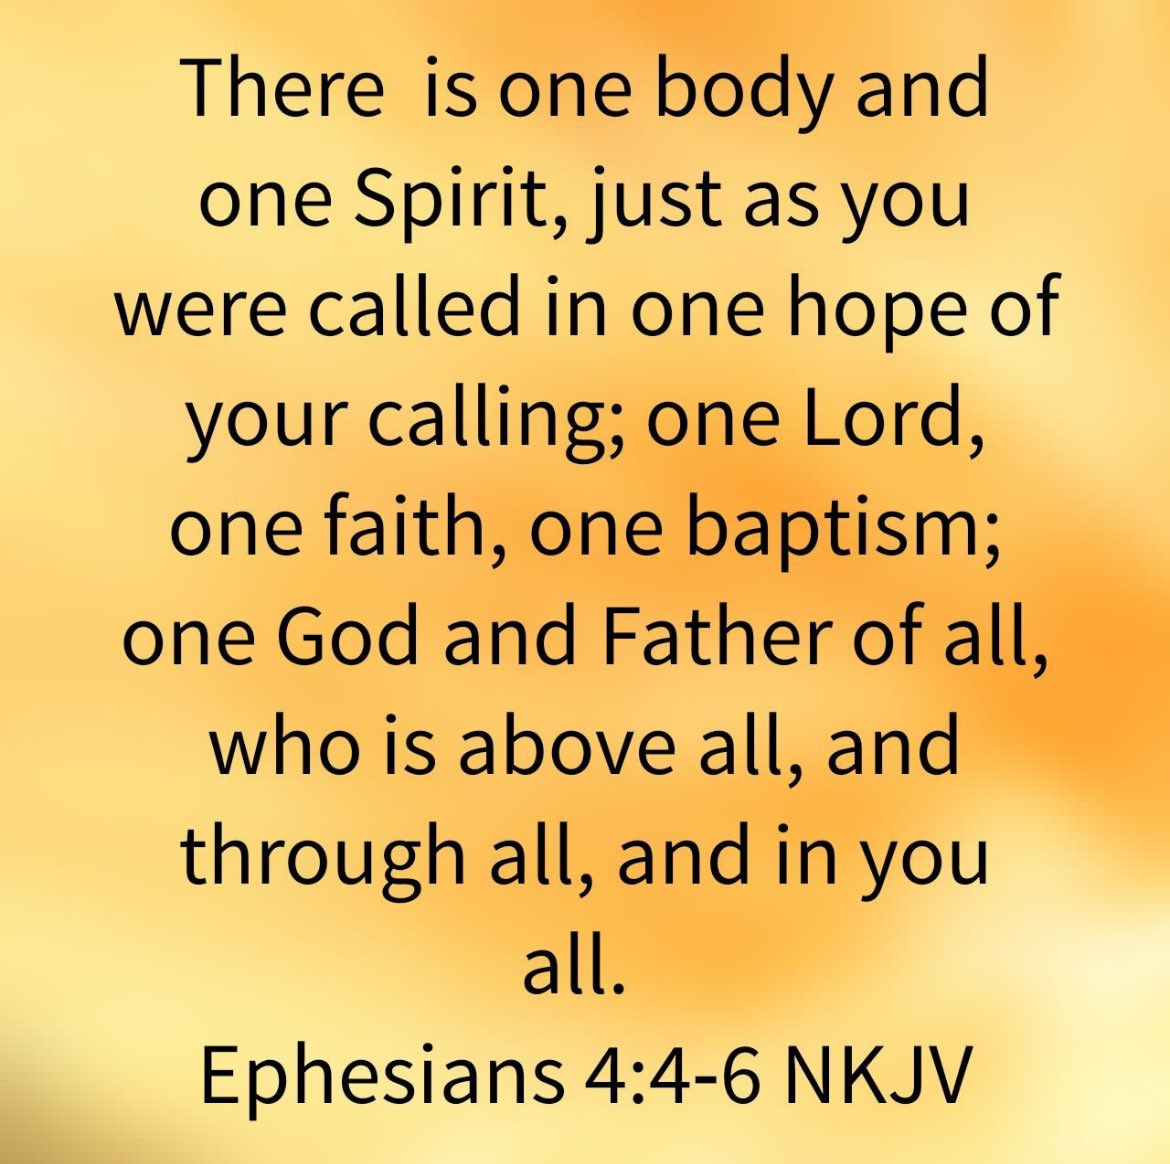 #OneBody #OneSpirit #OneHope #OneLord #OneFaith #OneBaptism #OneGod #FatherOfAll #AboveAll #ThroughAll #InYouAll #Scriptures #CalvaryChapel #Church #CalvaryChapelSahuarita #CalvaryChapelOfSahuarita #CCOS